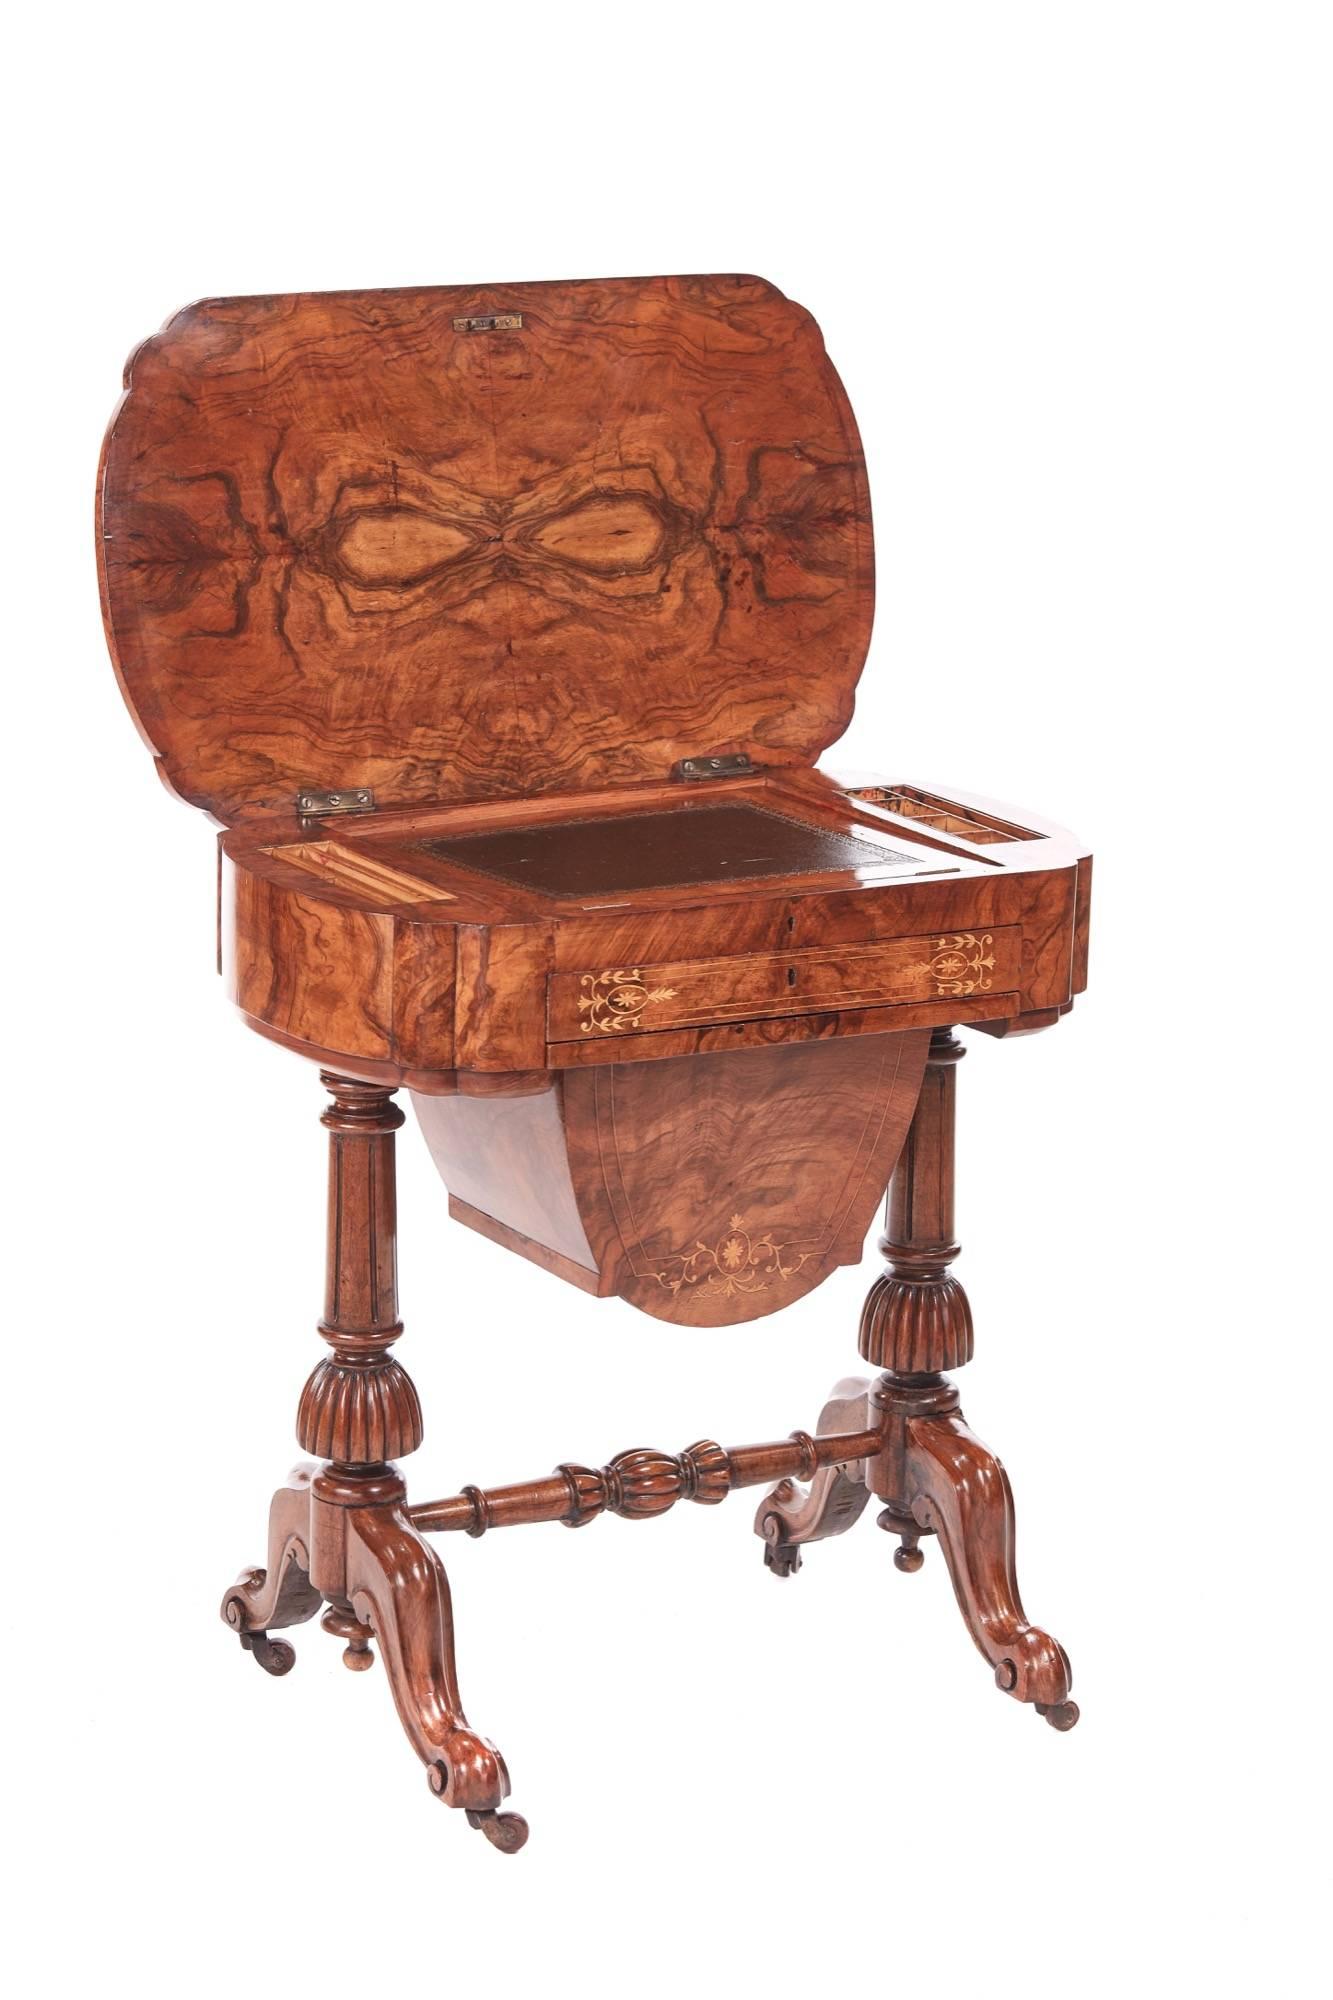 Outstanding Victorian freestanding inlaid burr walnut writing / sewing table, having a lovely burr walnut lift up top with satinwood inlay, inside is a fitted writing slope, one frieze fitted drawer with satinwood inlay, one sliding burr walnut